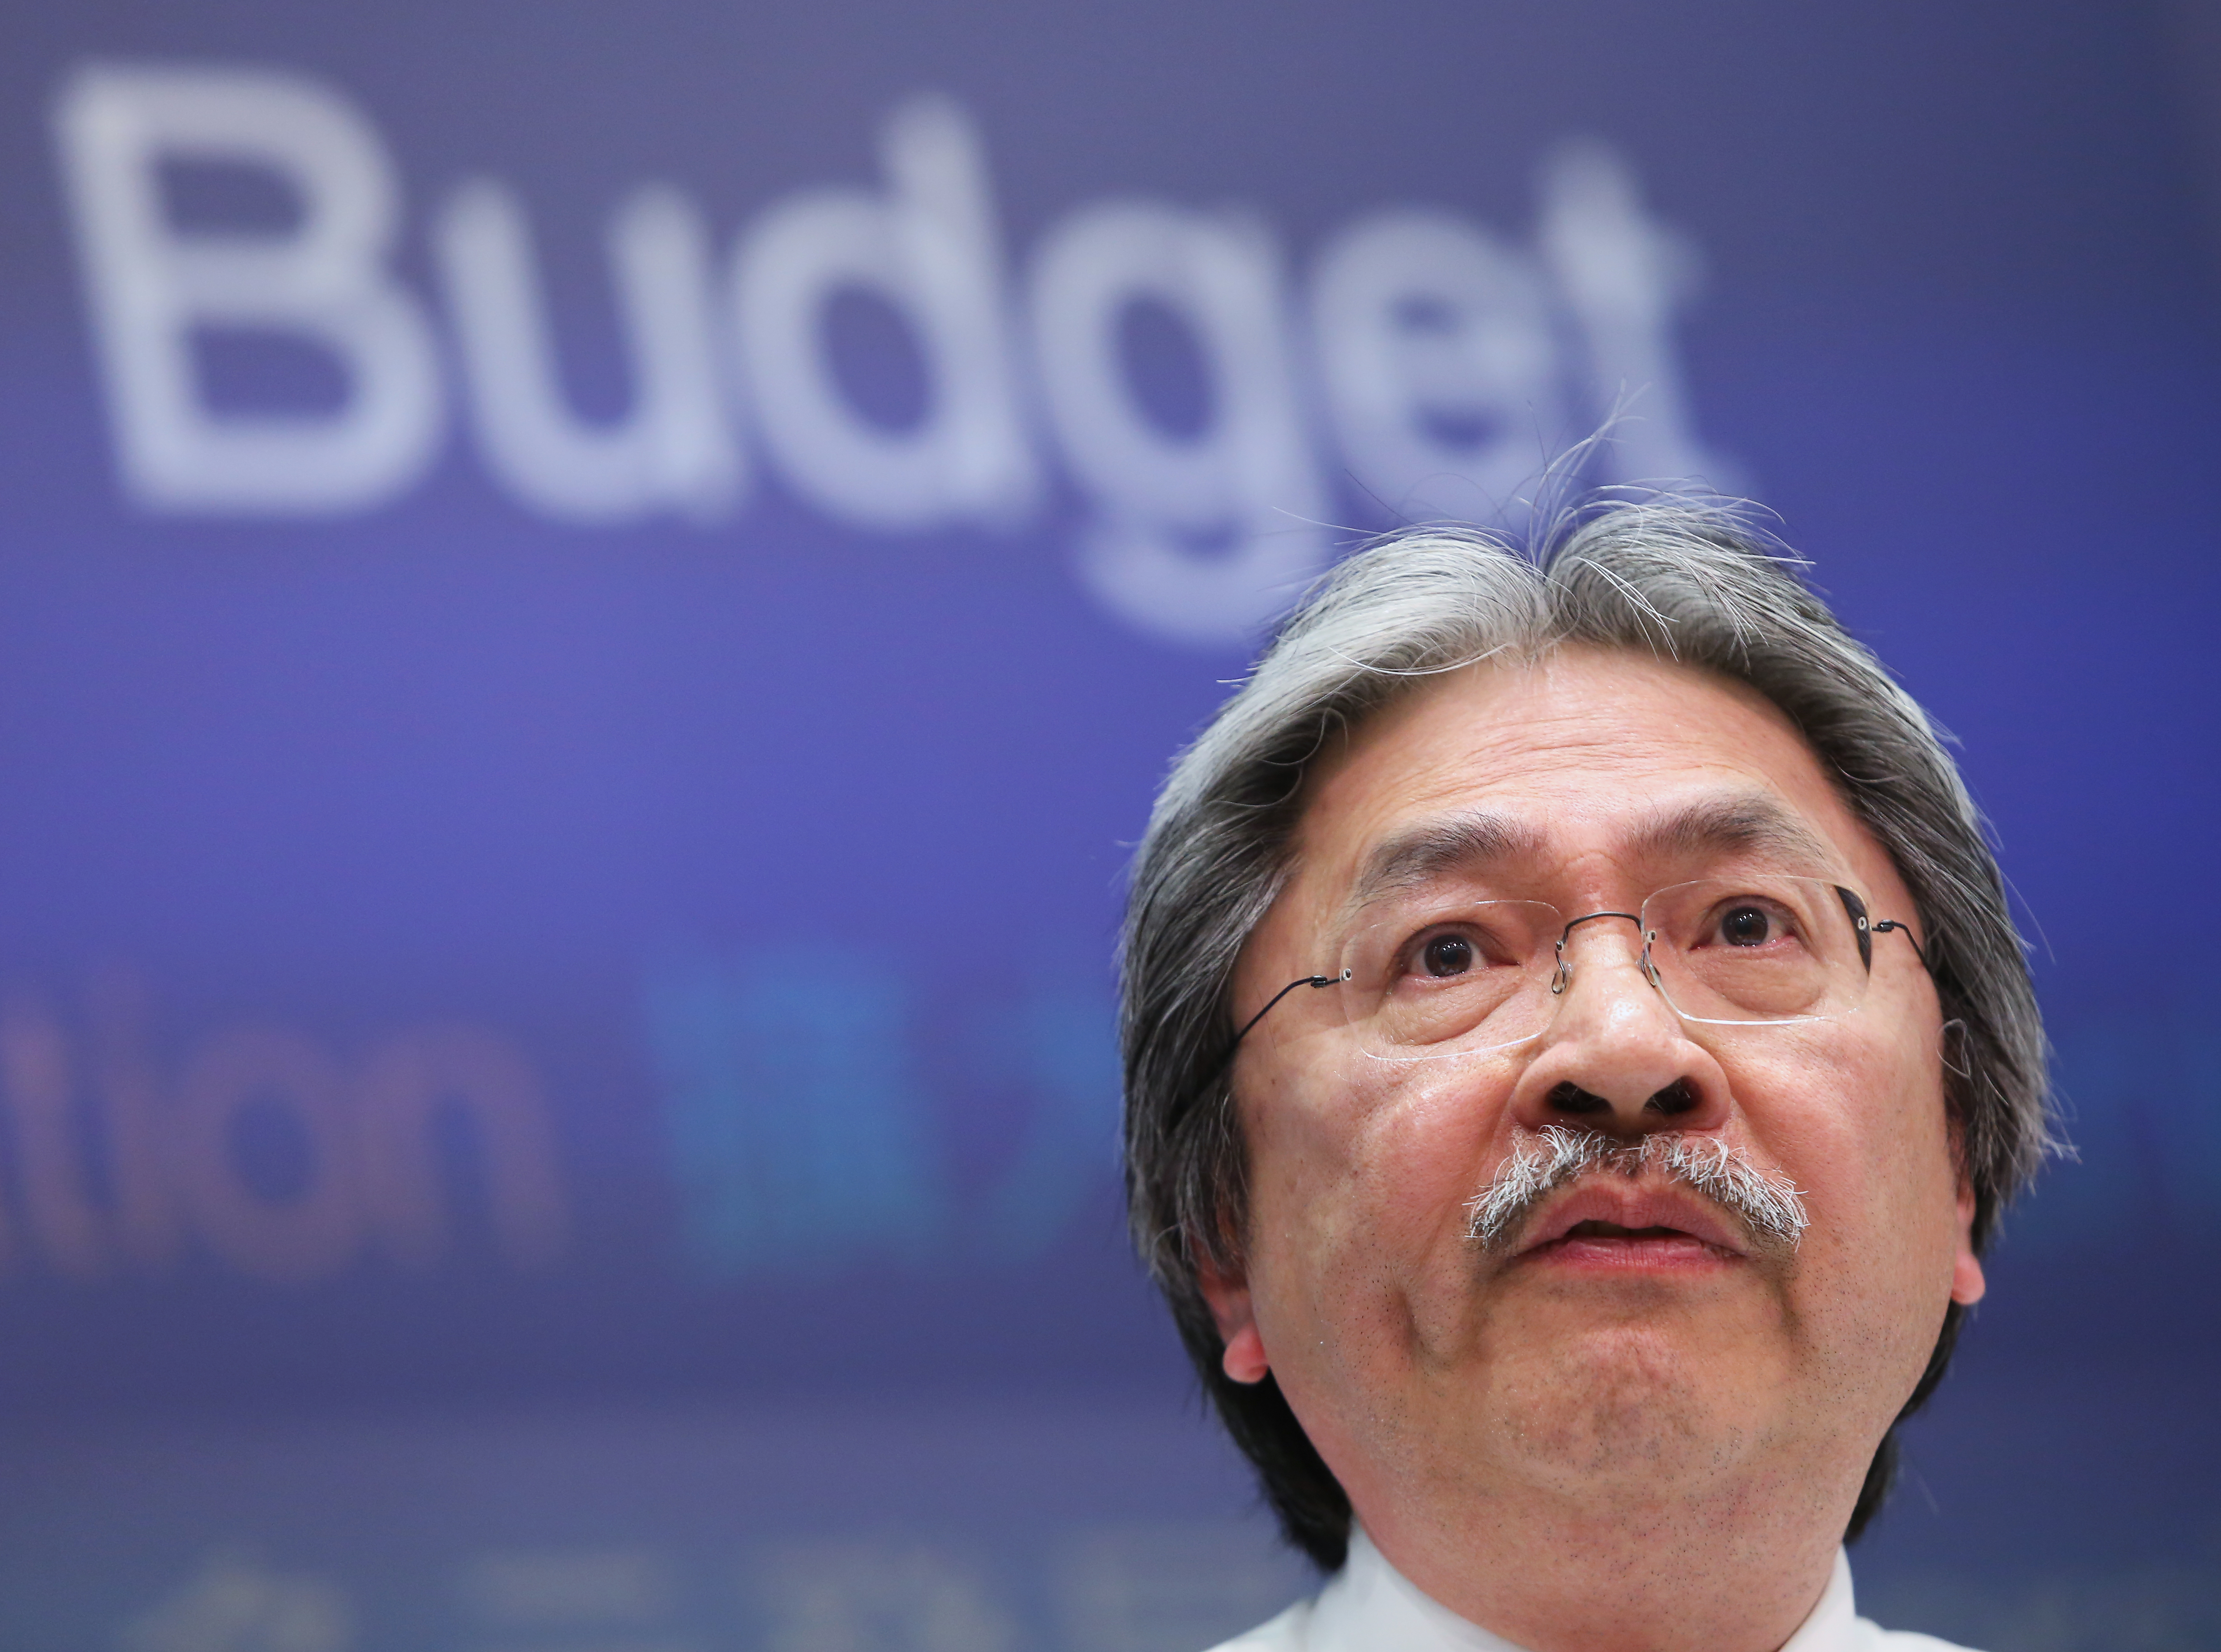 While John Tsang has outperformed his predecessors in enriching the government, few ordinary folk would share his sense of achievement. Photo: Sam Tsang